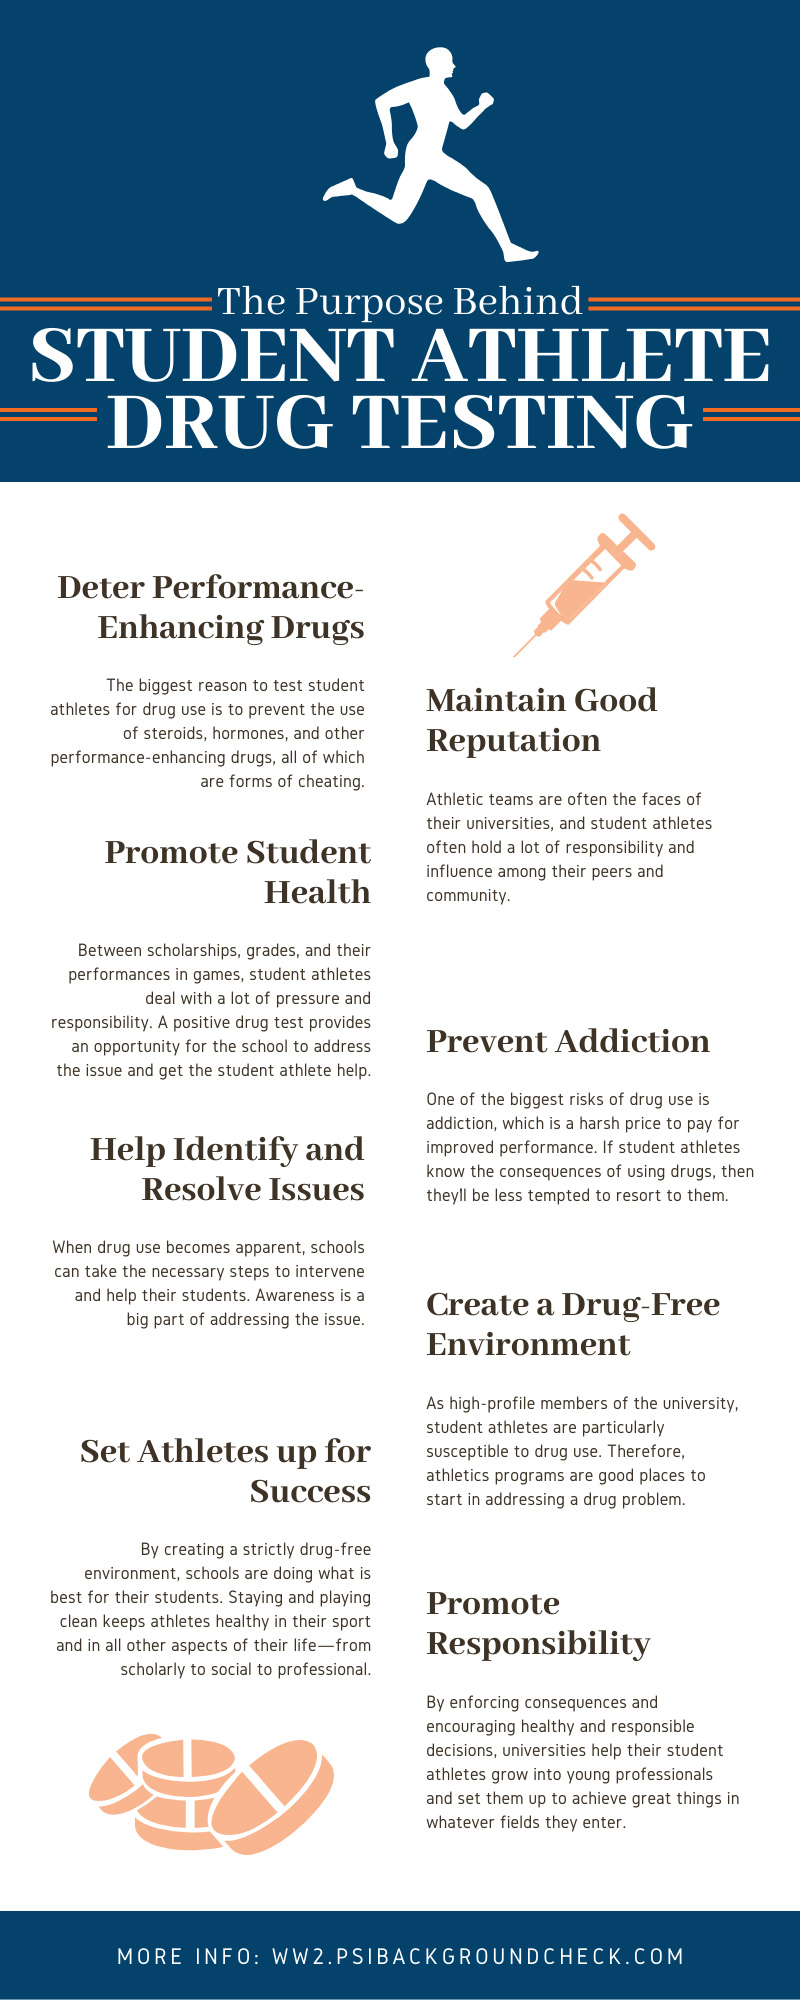 The Purpose Behind Student Athlete Drug Testing infographic